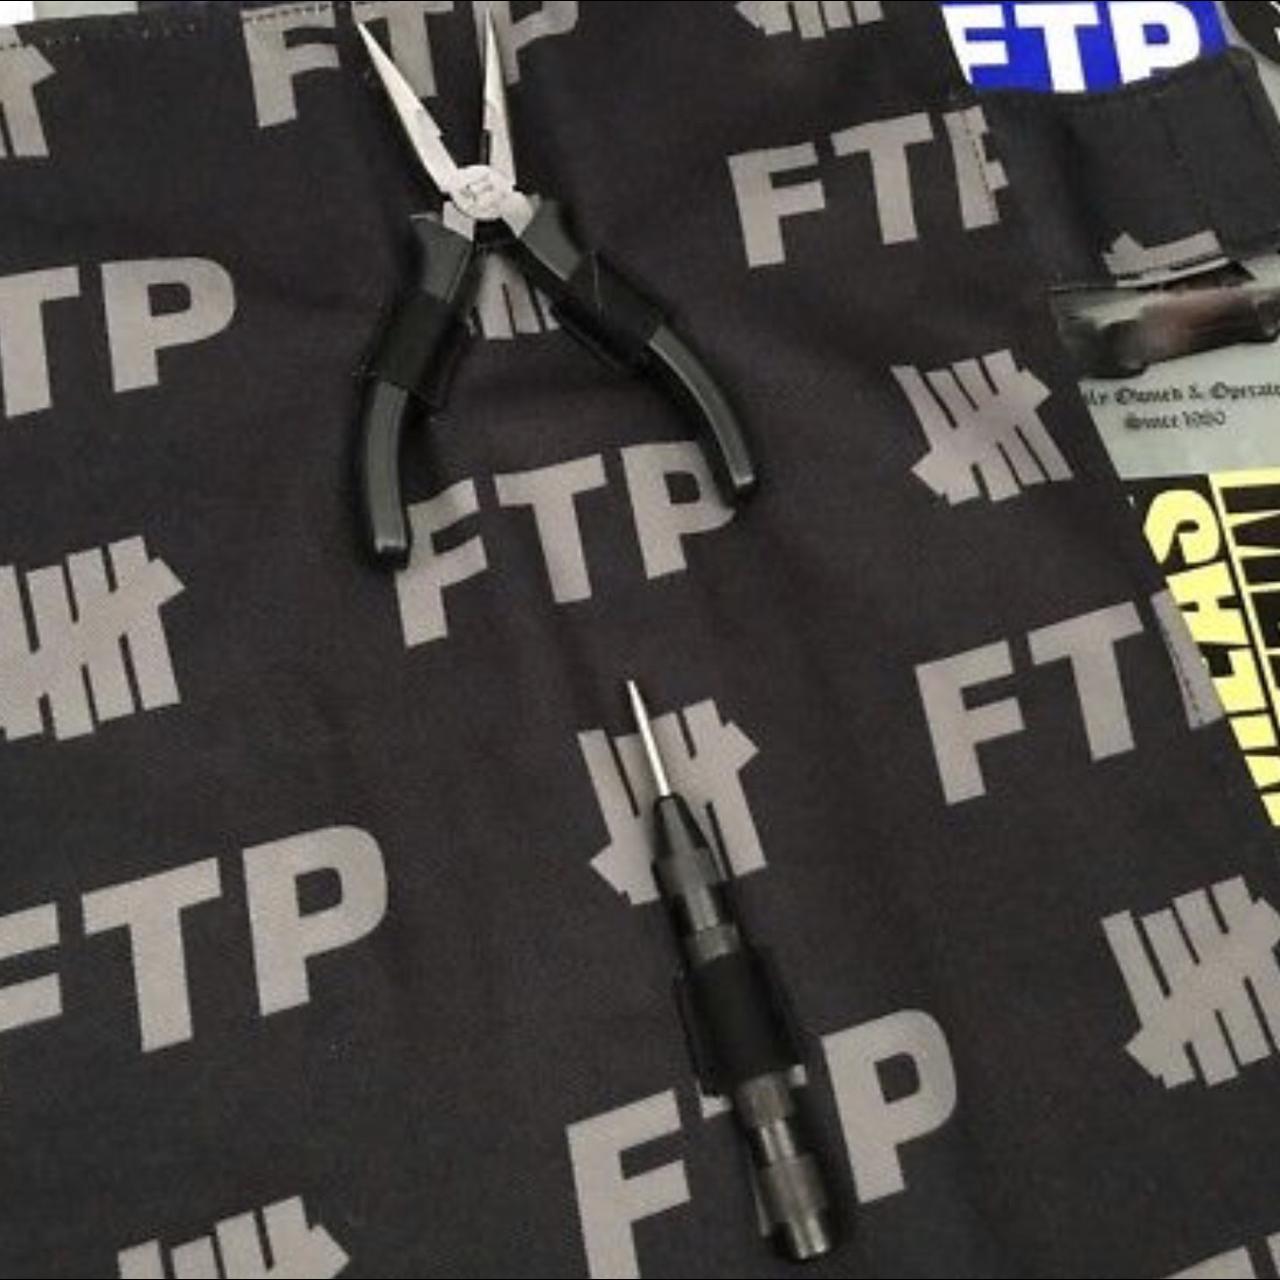 Brand new FTP x Undefeated Lockout tool kit!... - Depop